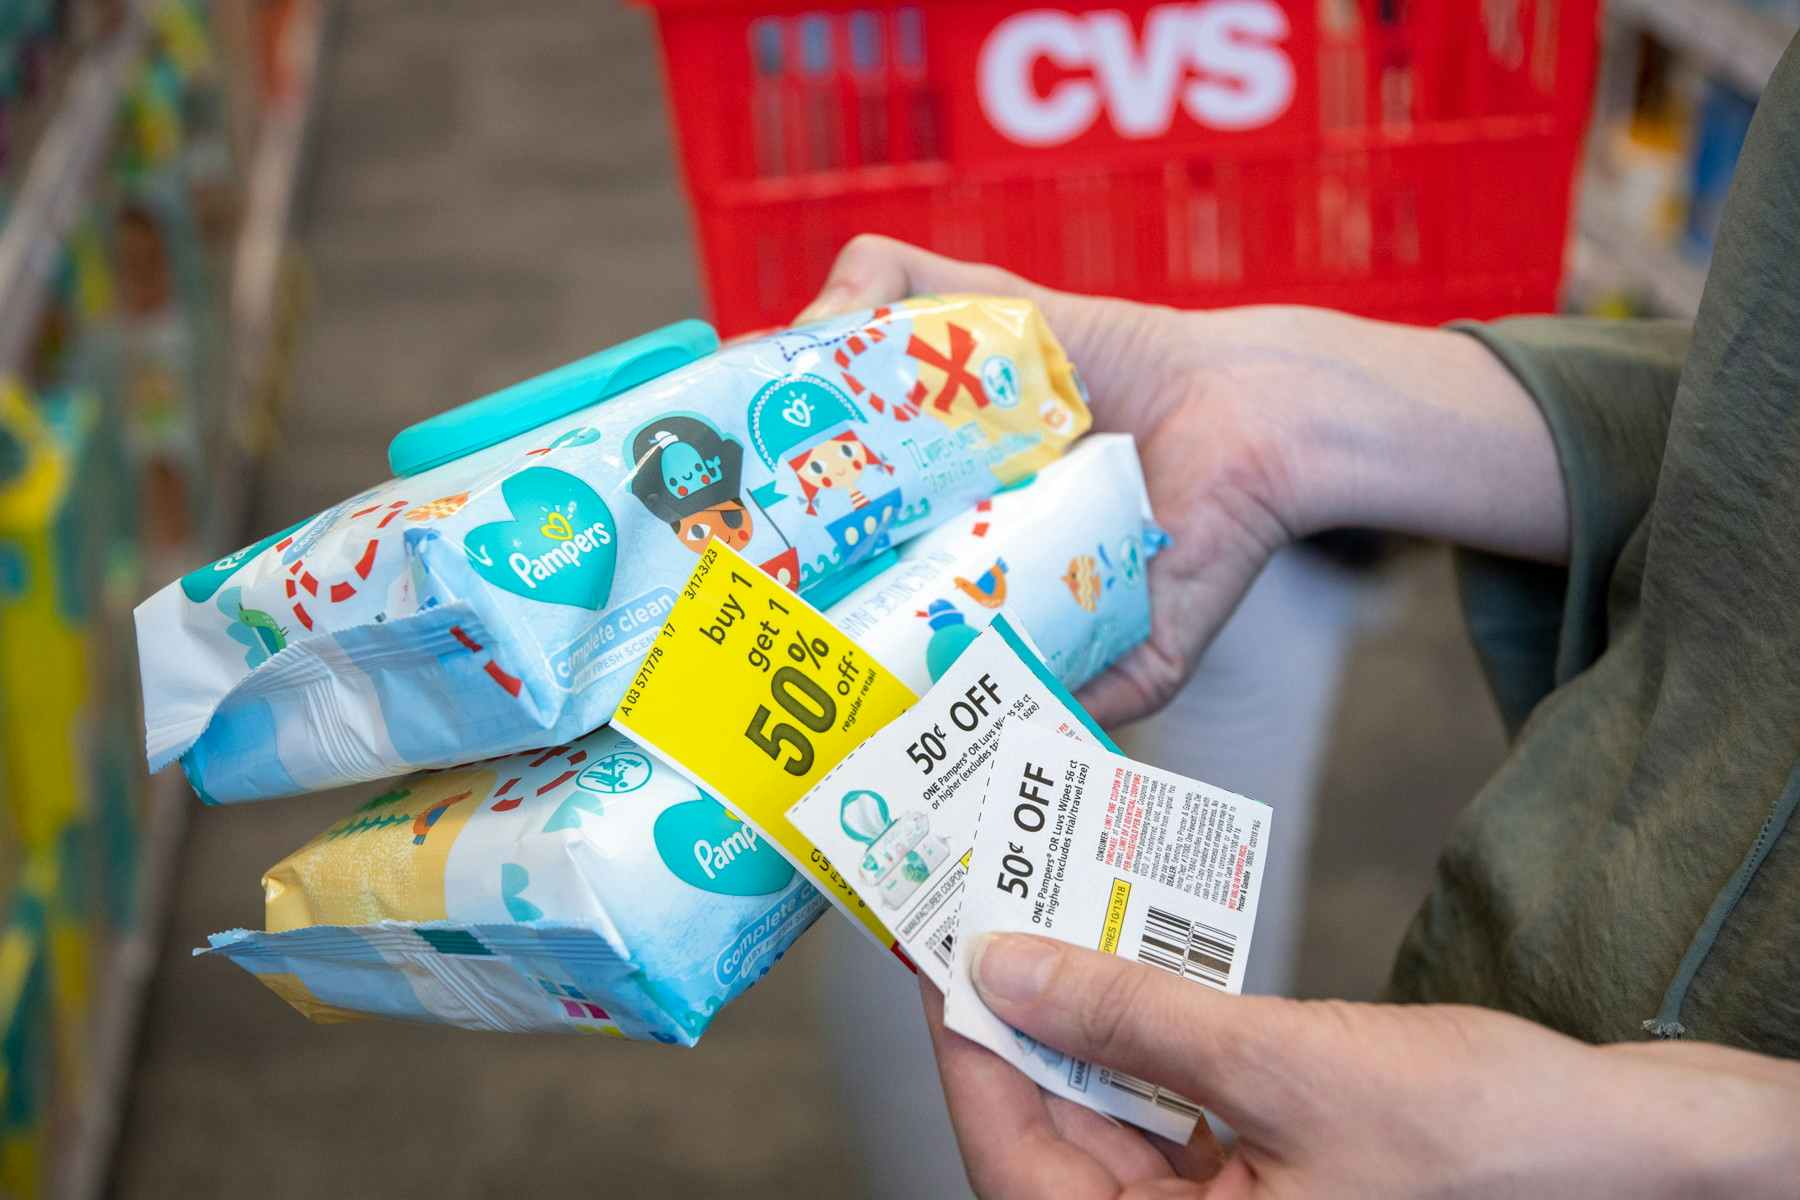 A person's hands holding two packs of Pampers baby wipes, two coupons, and a deal tag for Buy 1 Get 1 50% off in an aisle at CVS.